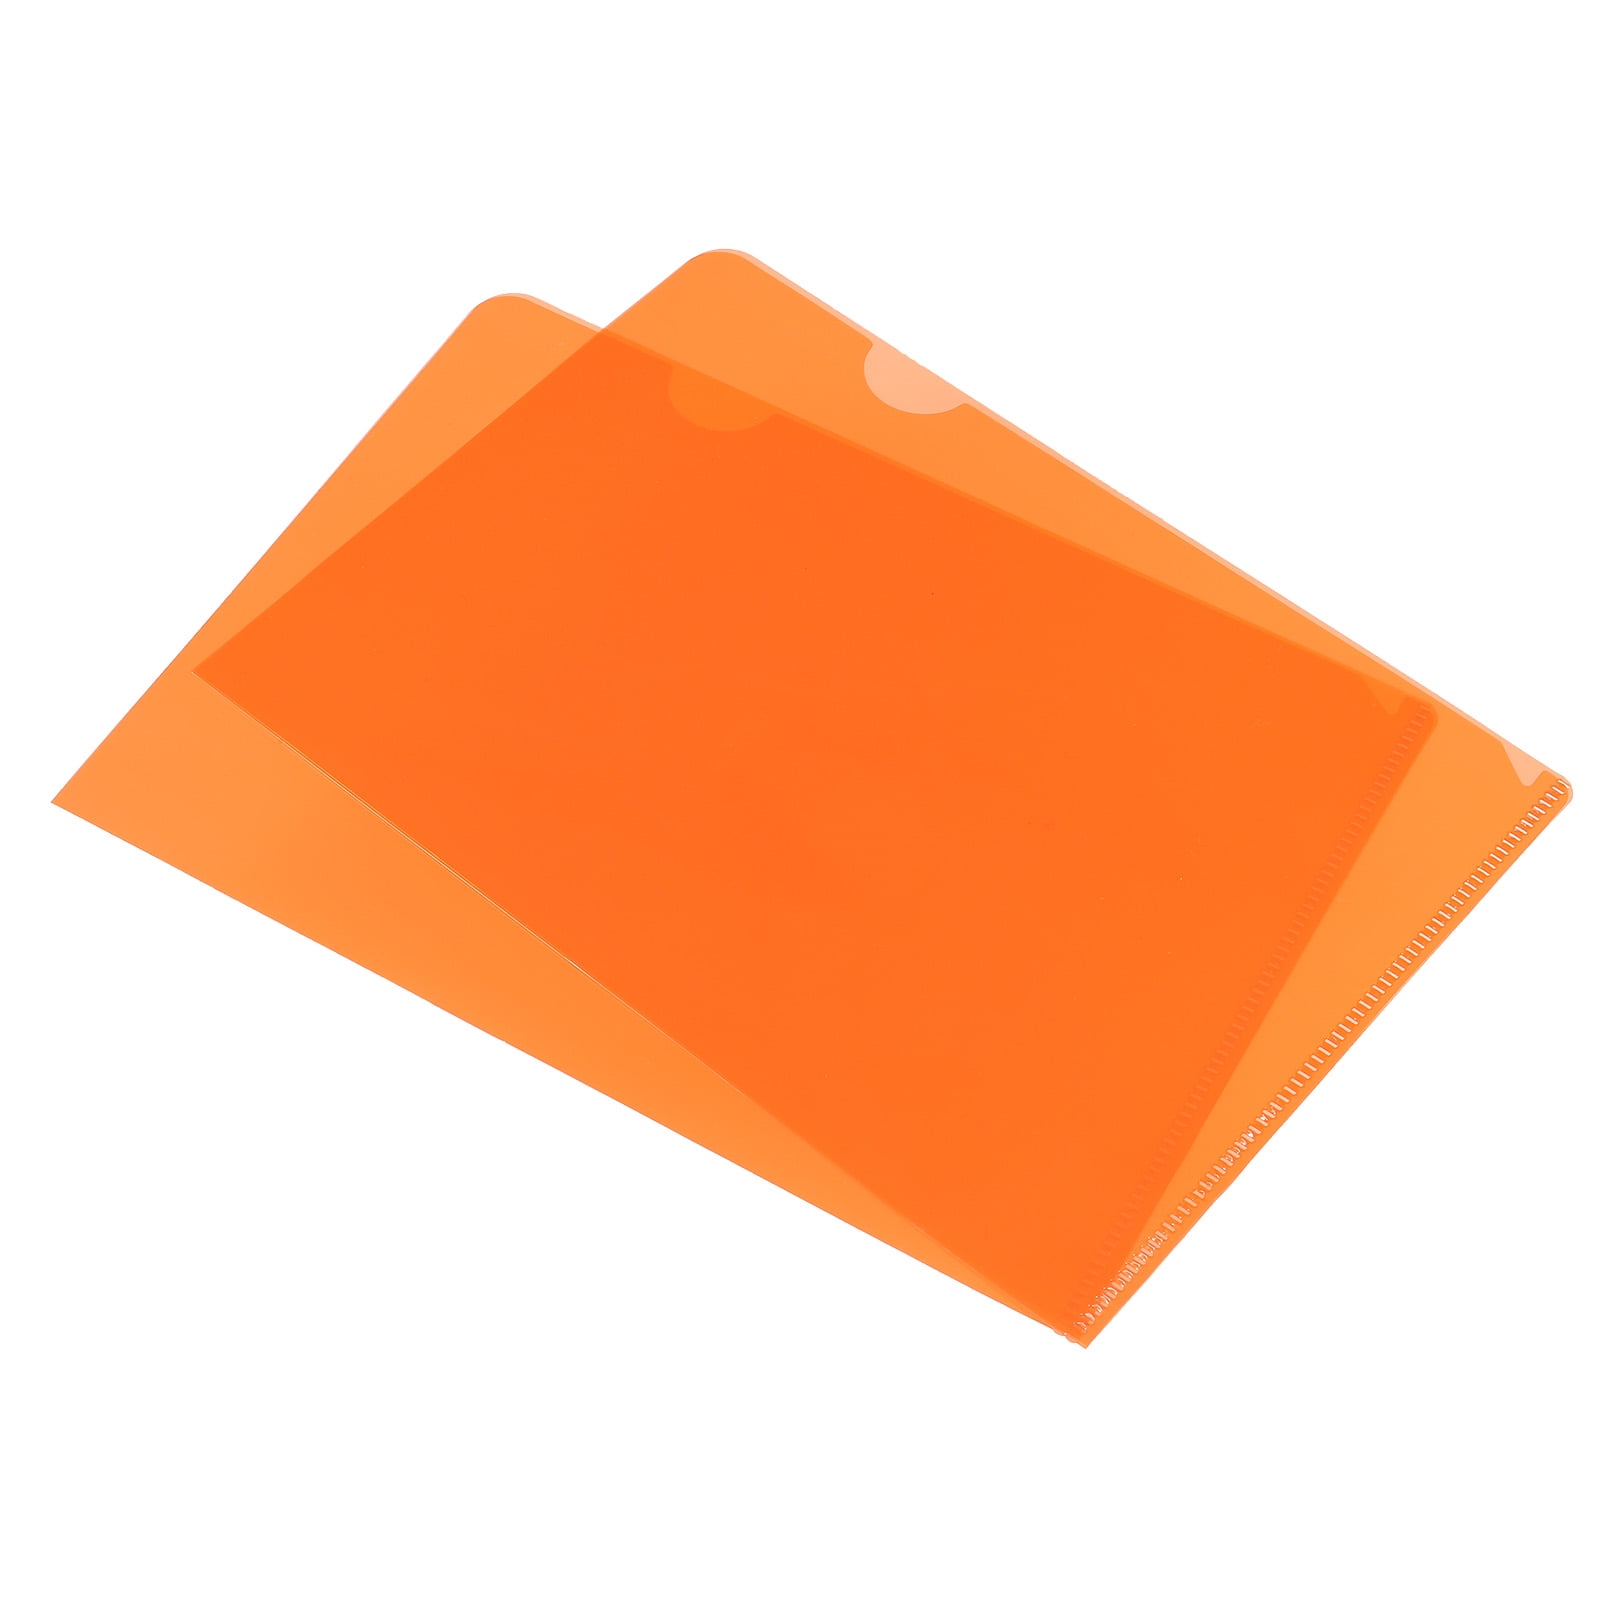 Variety of Durable Plastic Sleeves for Documents, JAM Paper